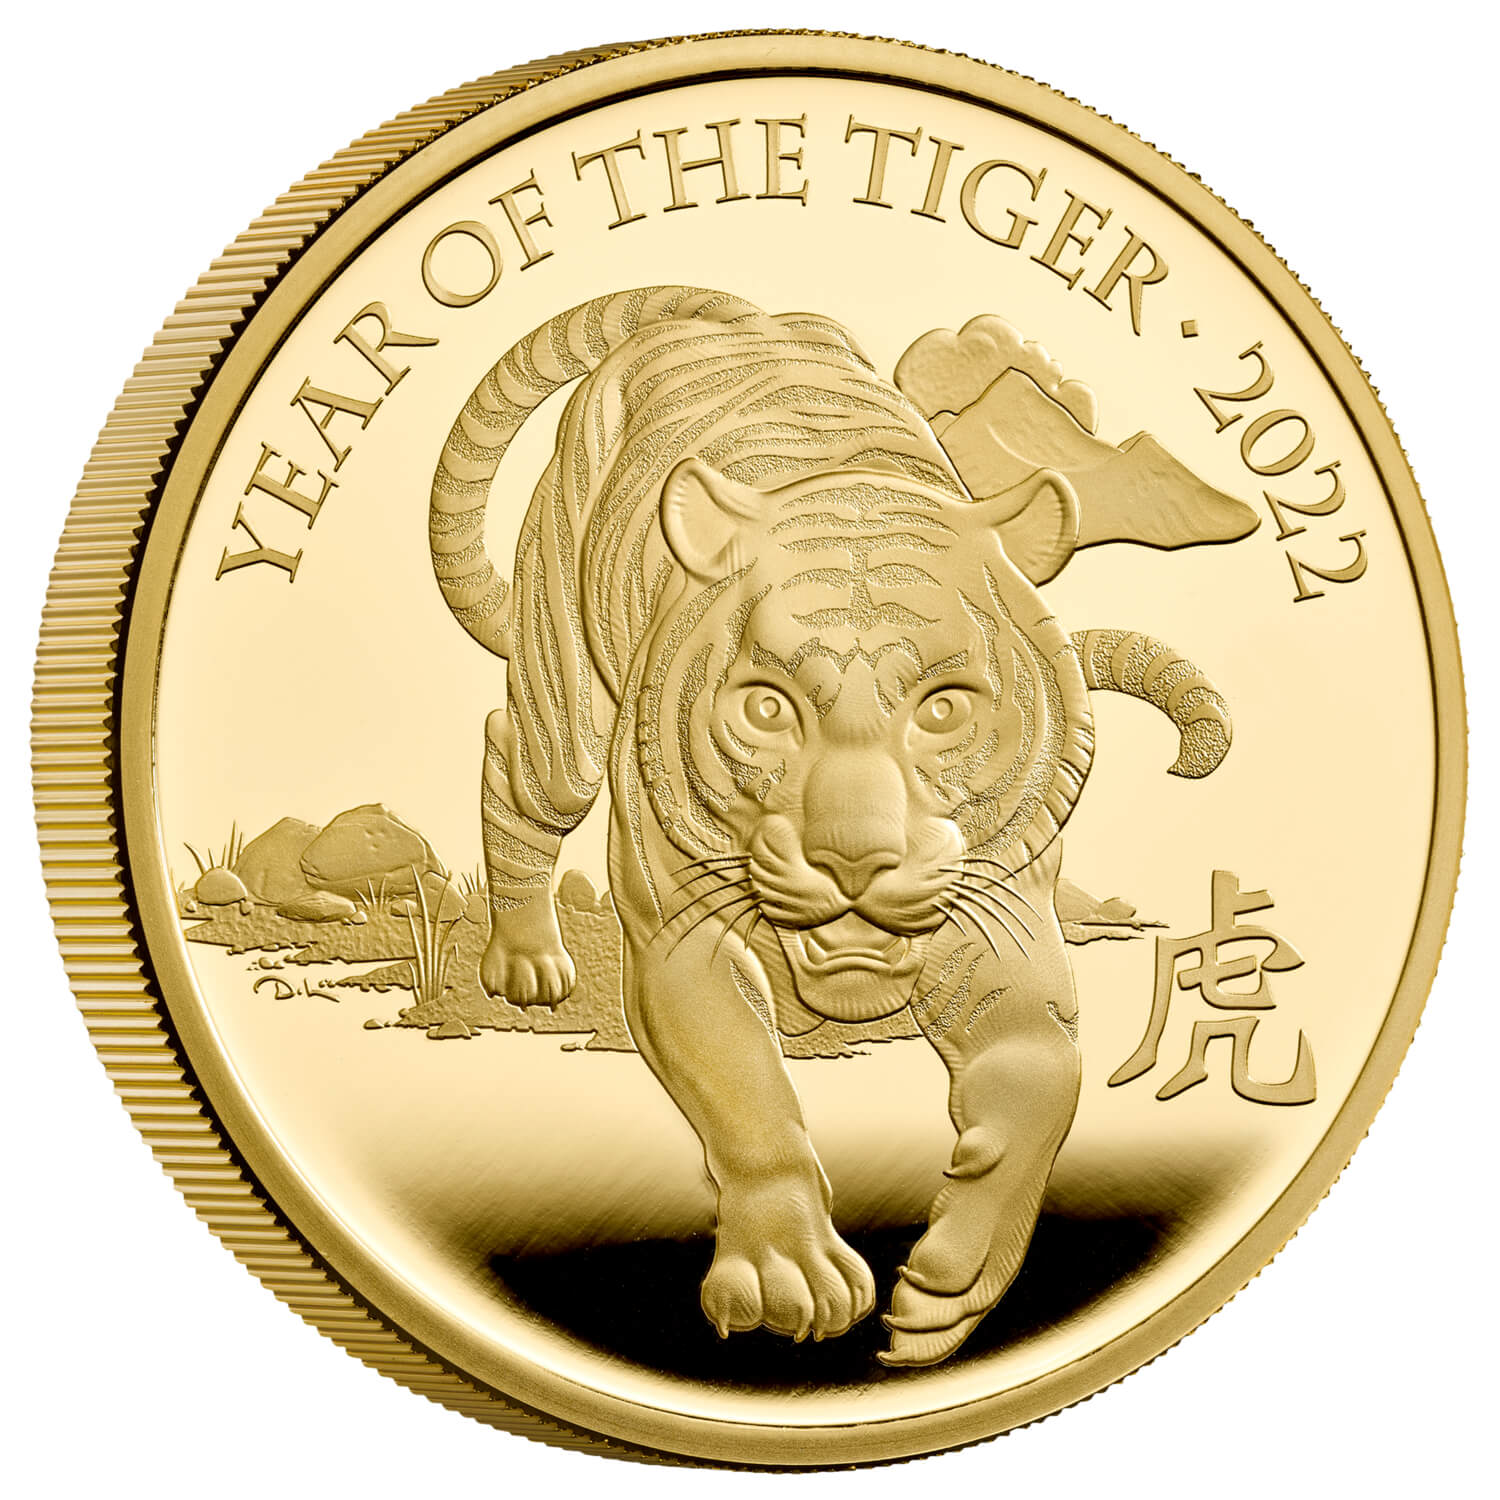 lunar year of the tiger 2022 united kingdom five ounce gold proof coin reverse edge ukt22g5 1500x1500 f3a2c67